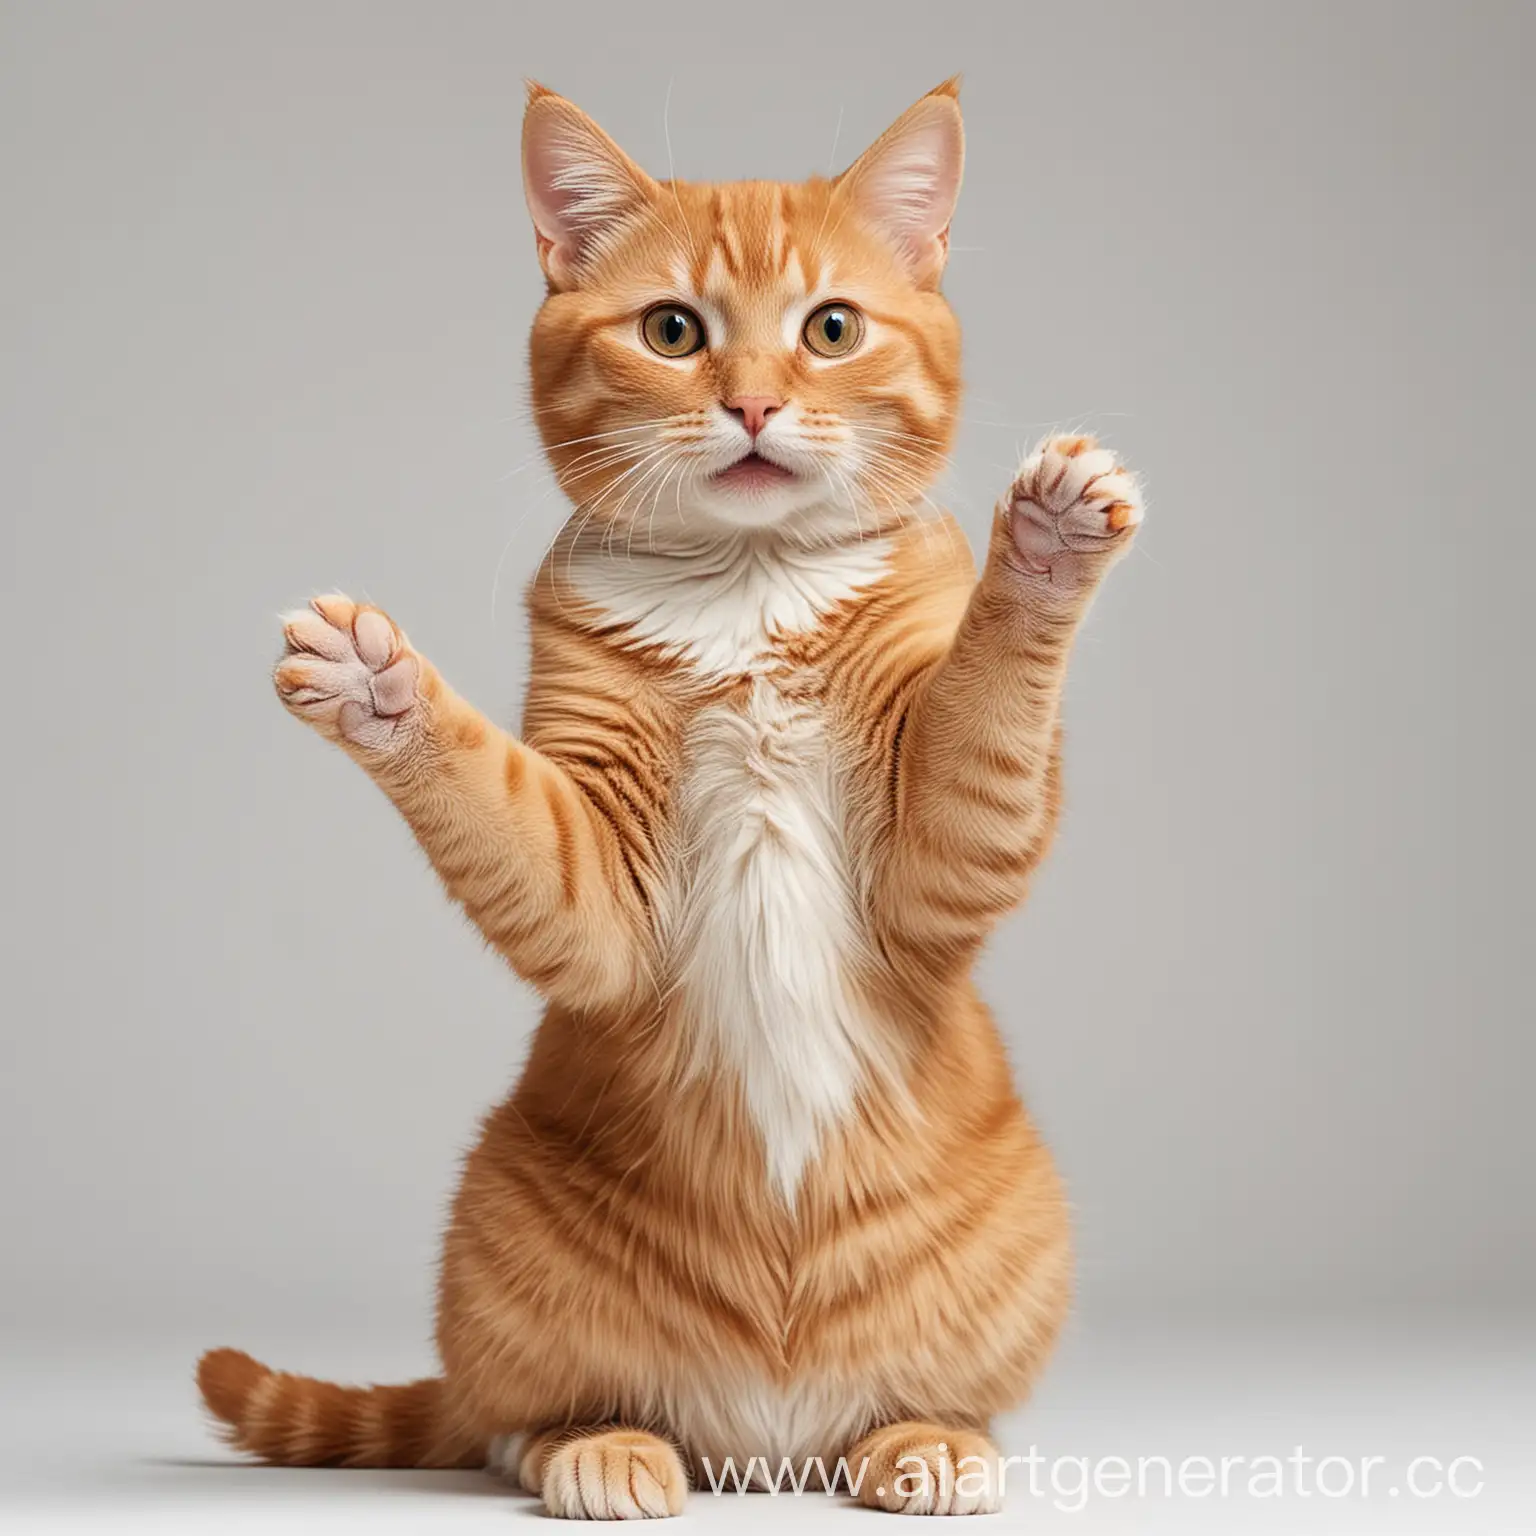 Ginger-Cat-Sitting-with-Raised-Paw-on-White-Background